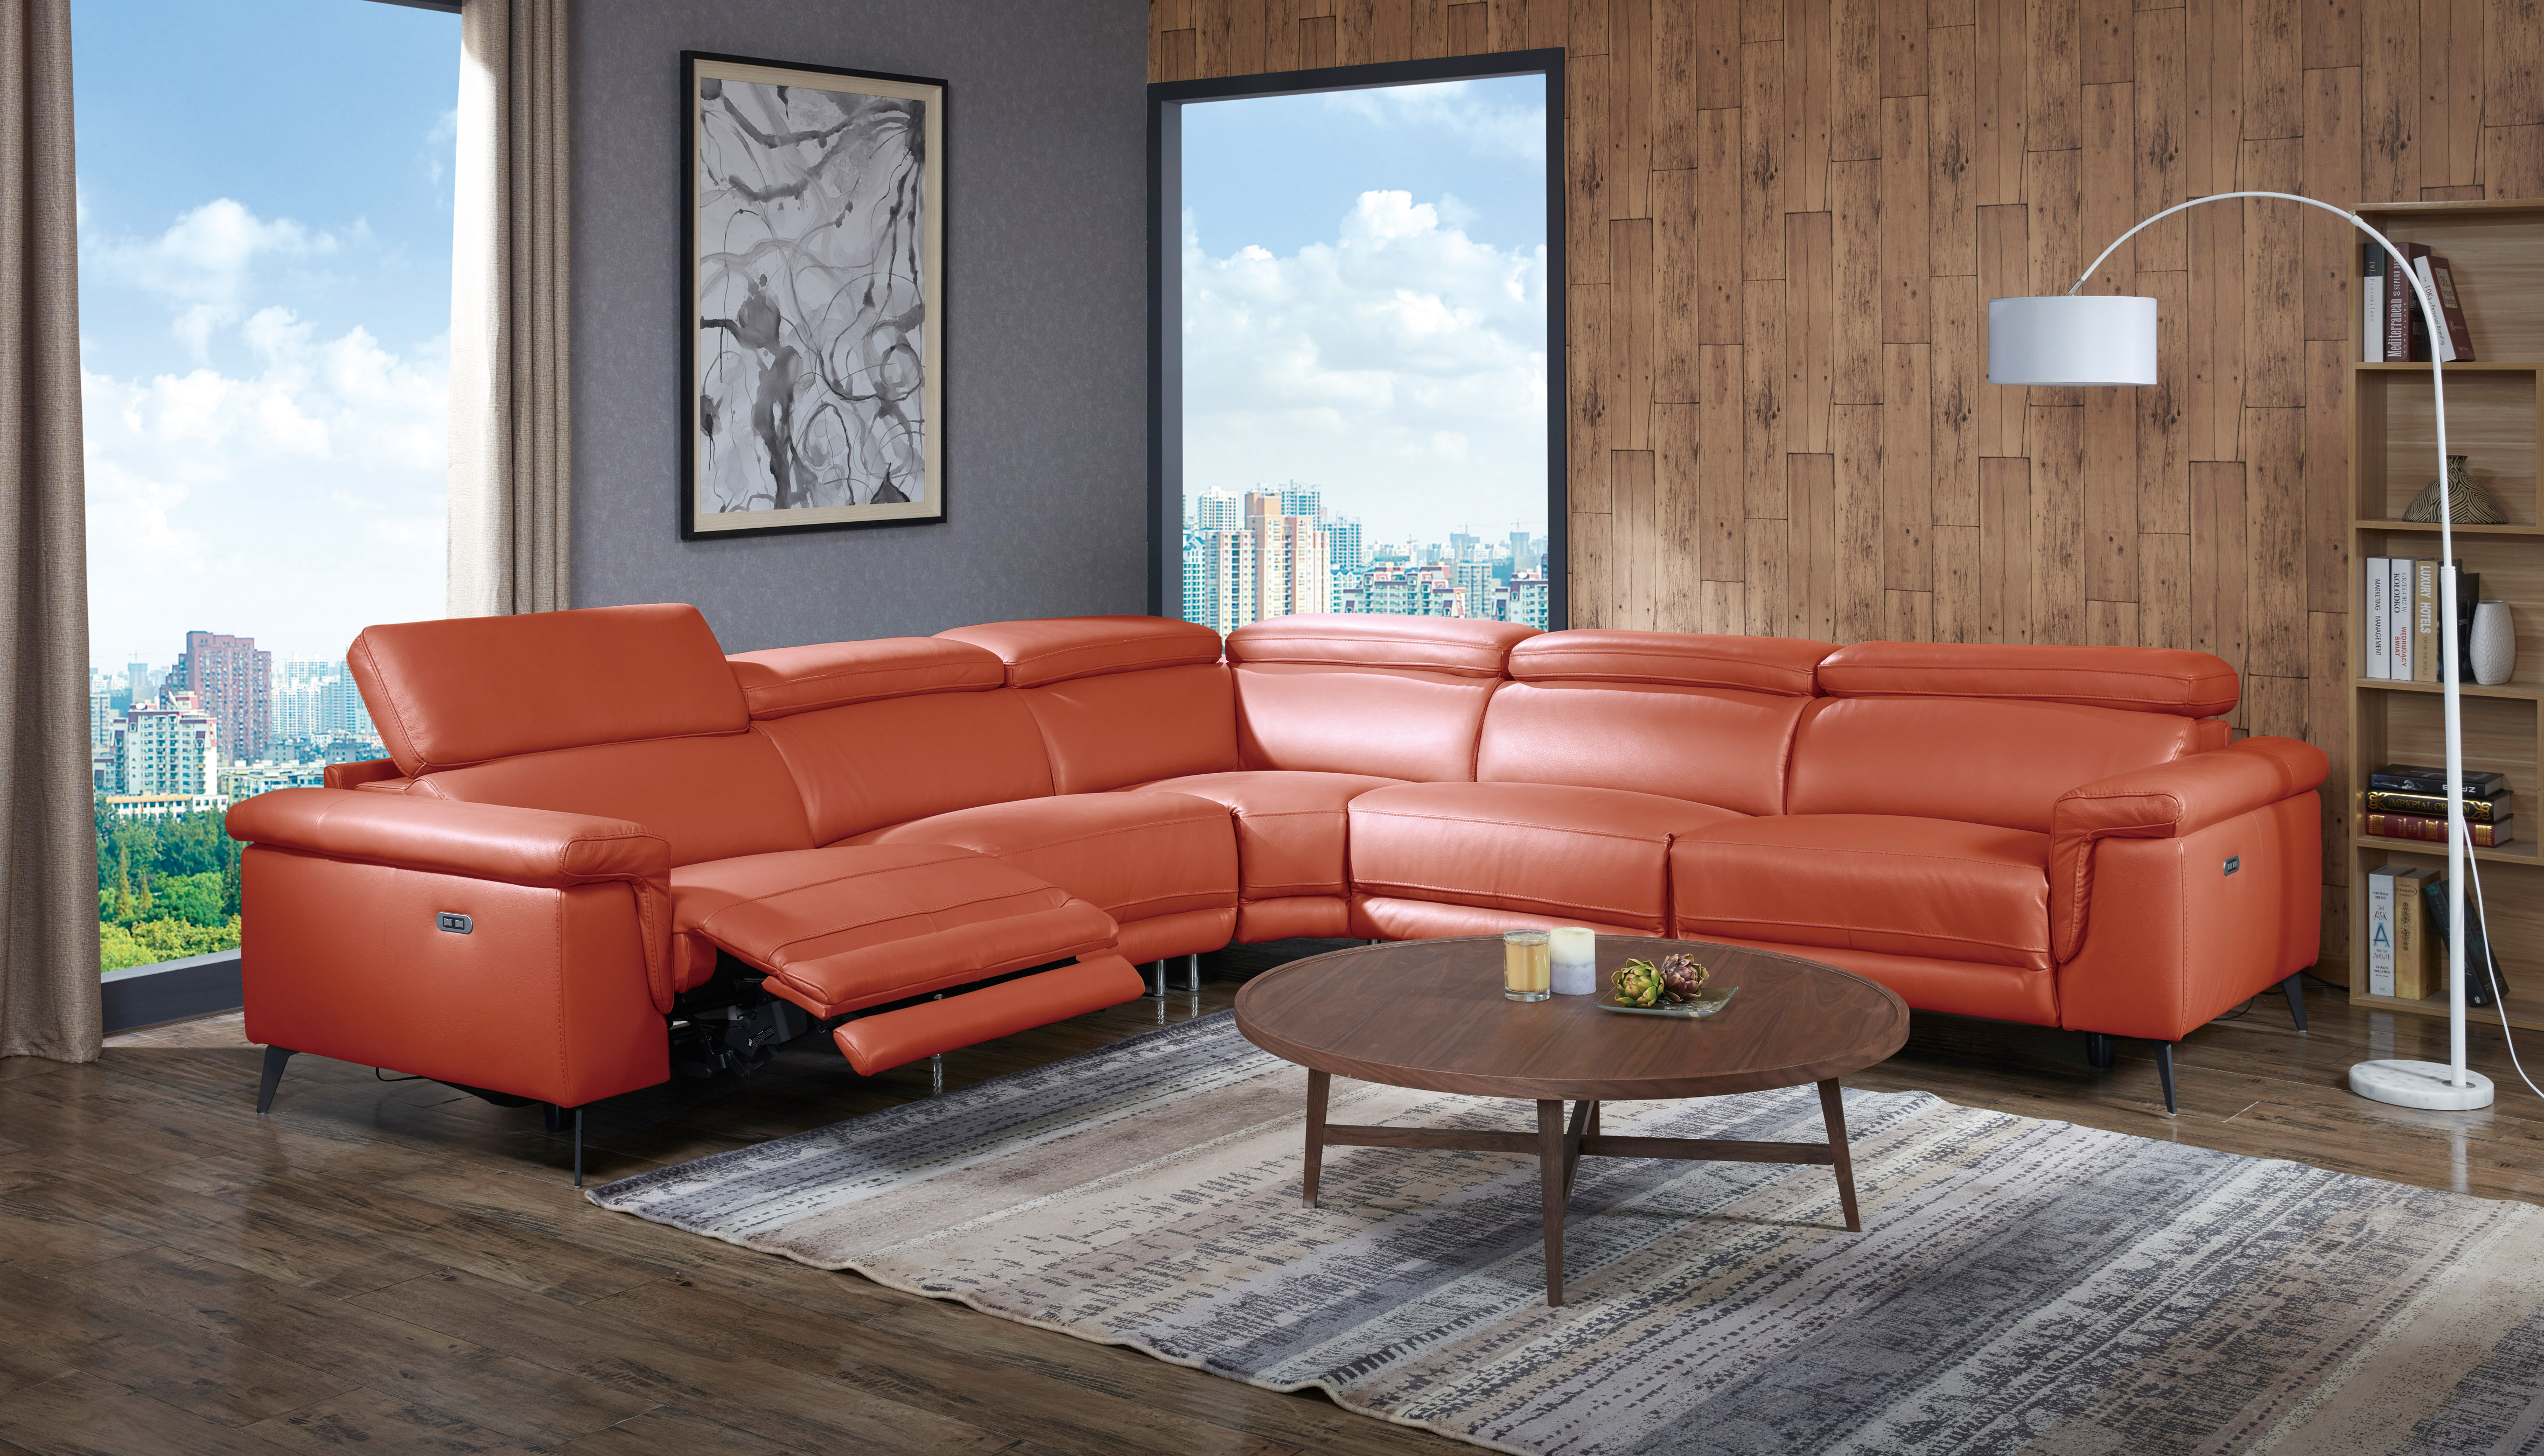 Elite Covered in Leather Sectional Beverly Hills Hendrix